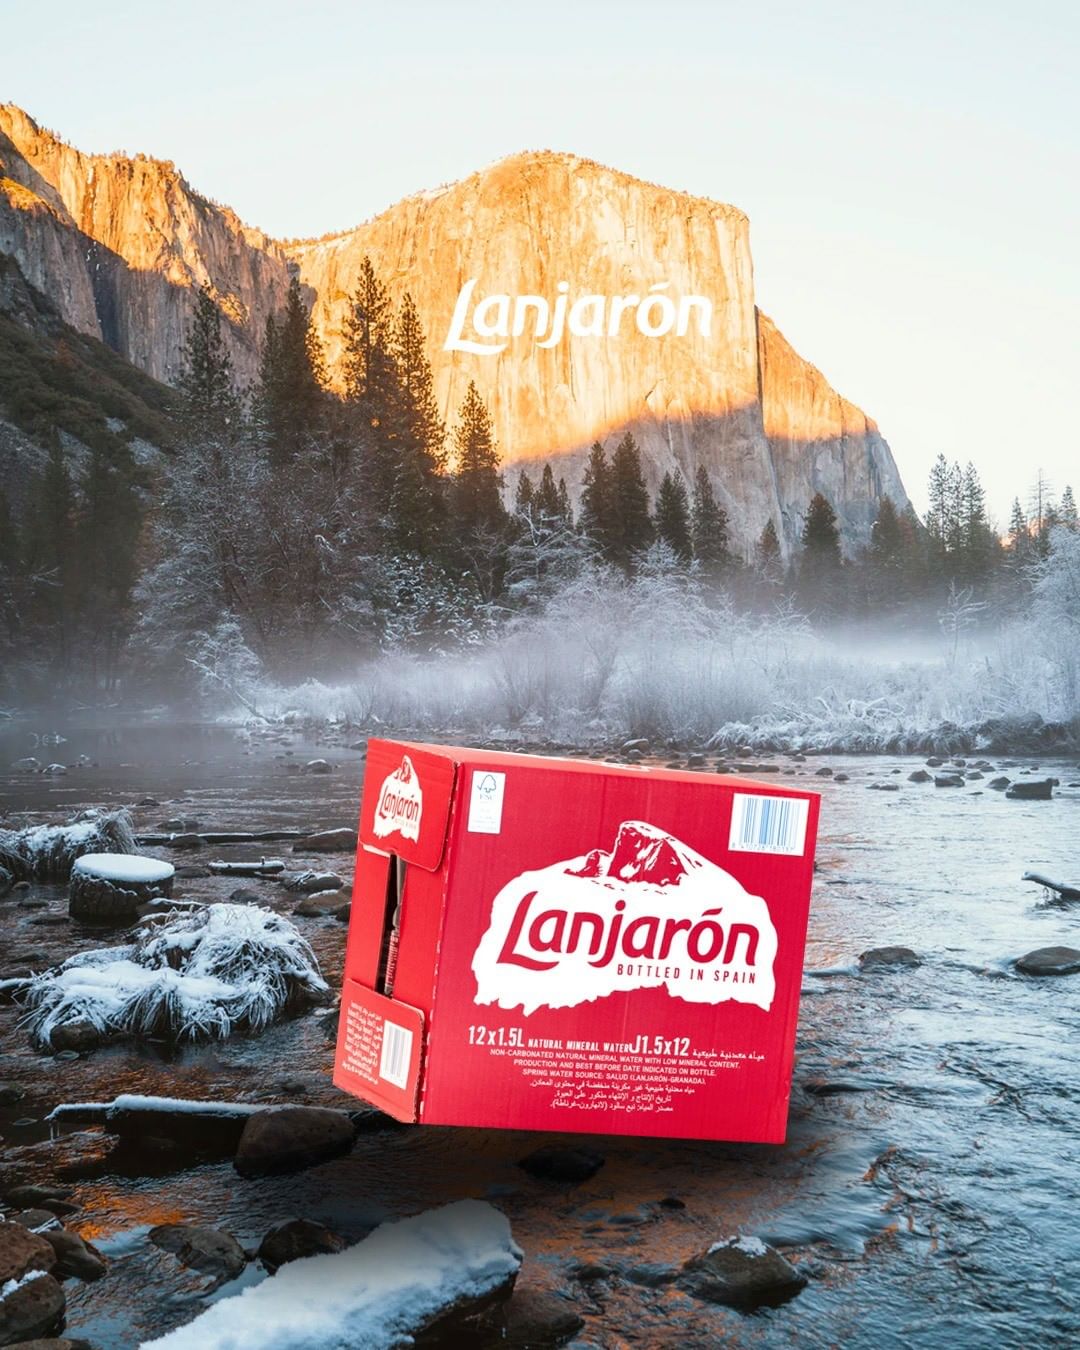 Tag that one friend who loves all things natural. #lanjaron #feelthepurity